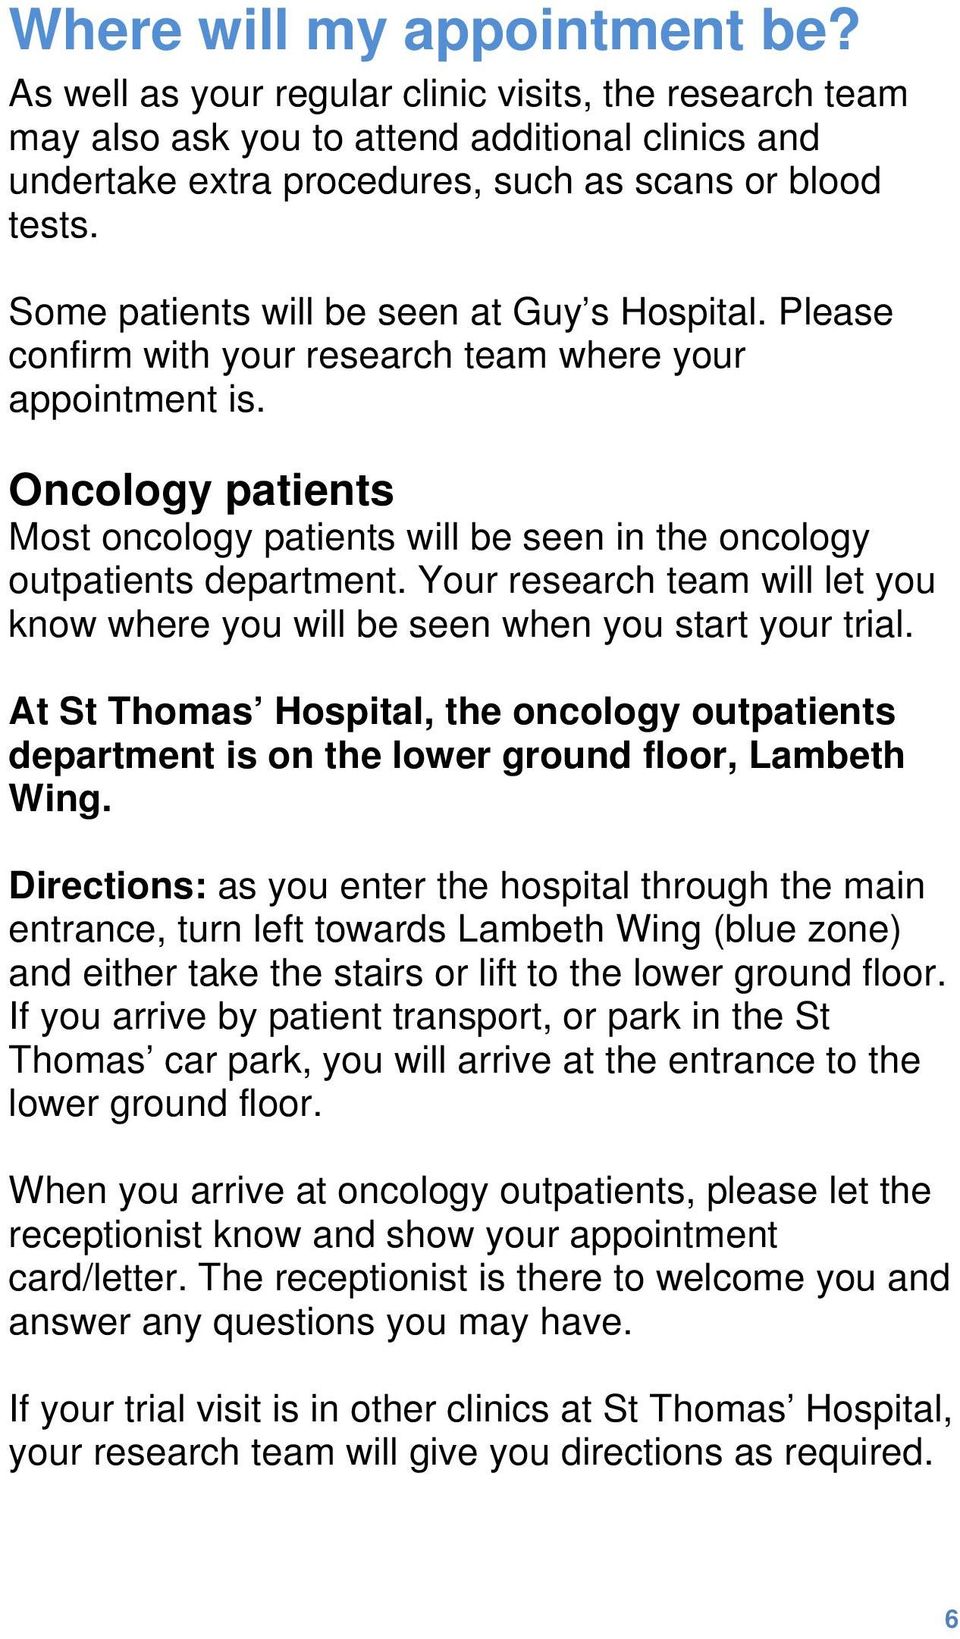 Oncology patients Most oncology patients will be seen in the oncology outpatients department. Your research team will let you know where you will be seen when you start your trial.